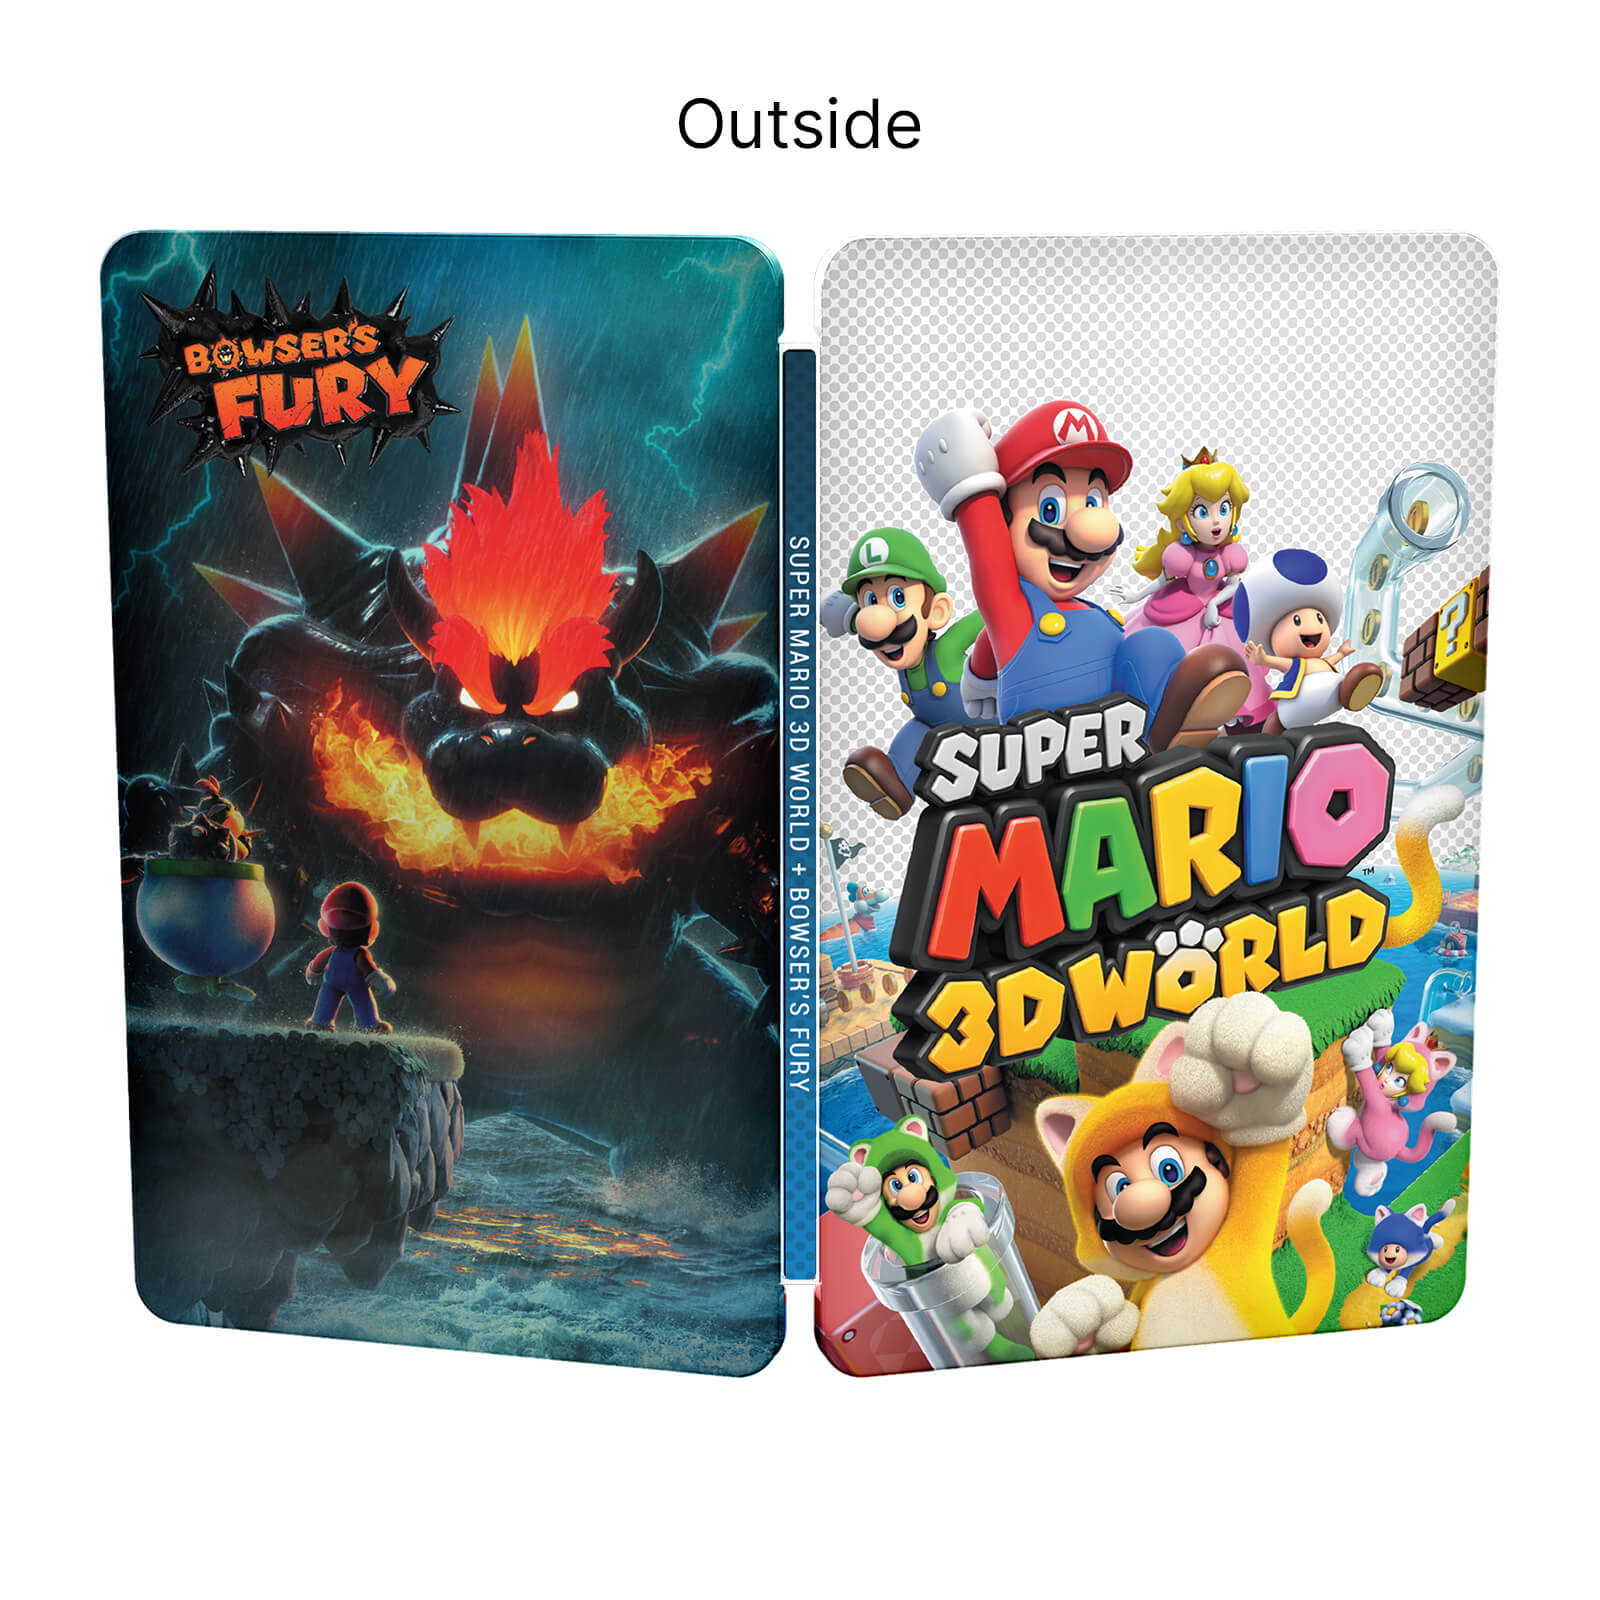 super mario 3d world and bowsers fury steelbook case photo 1